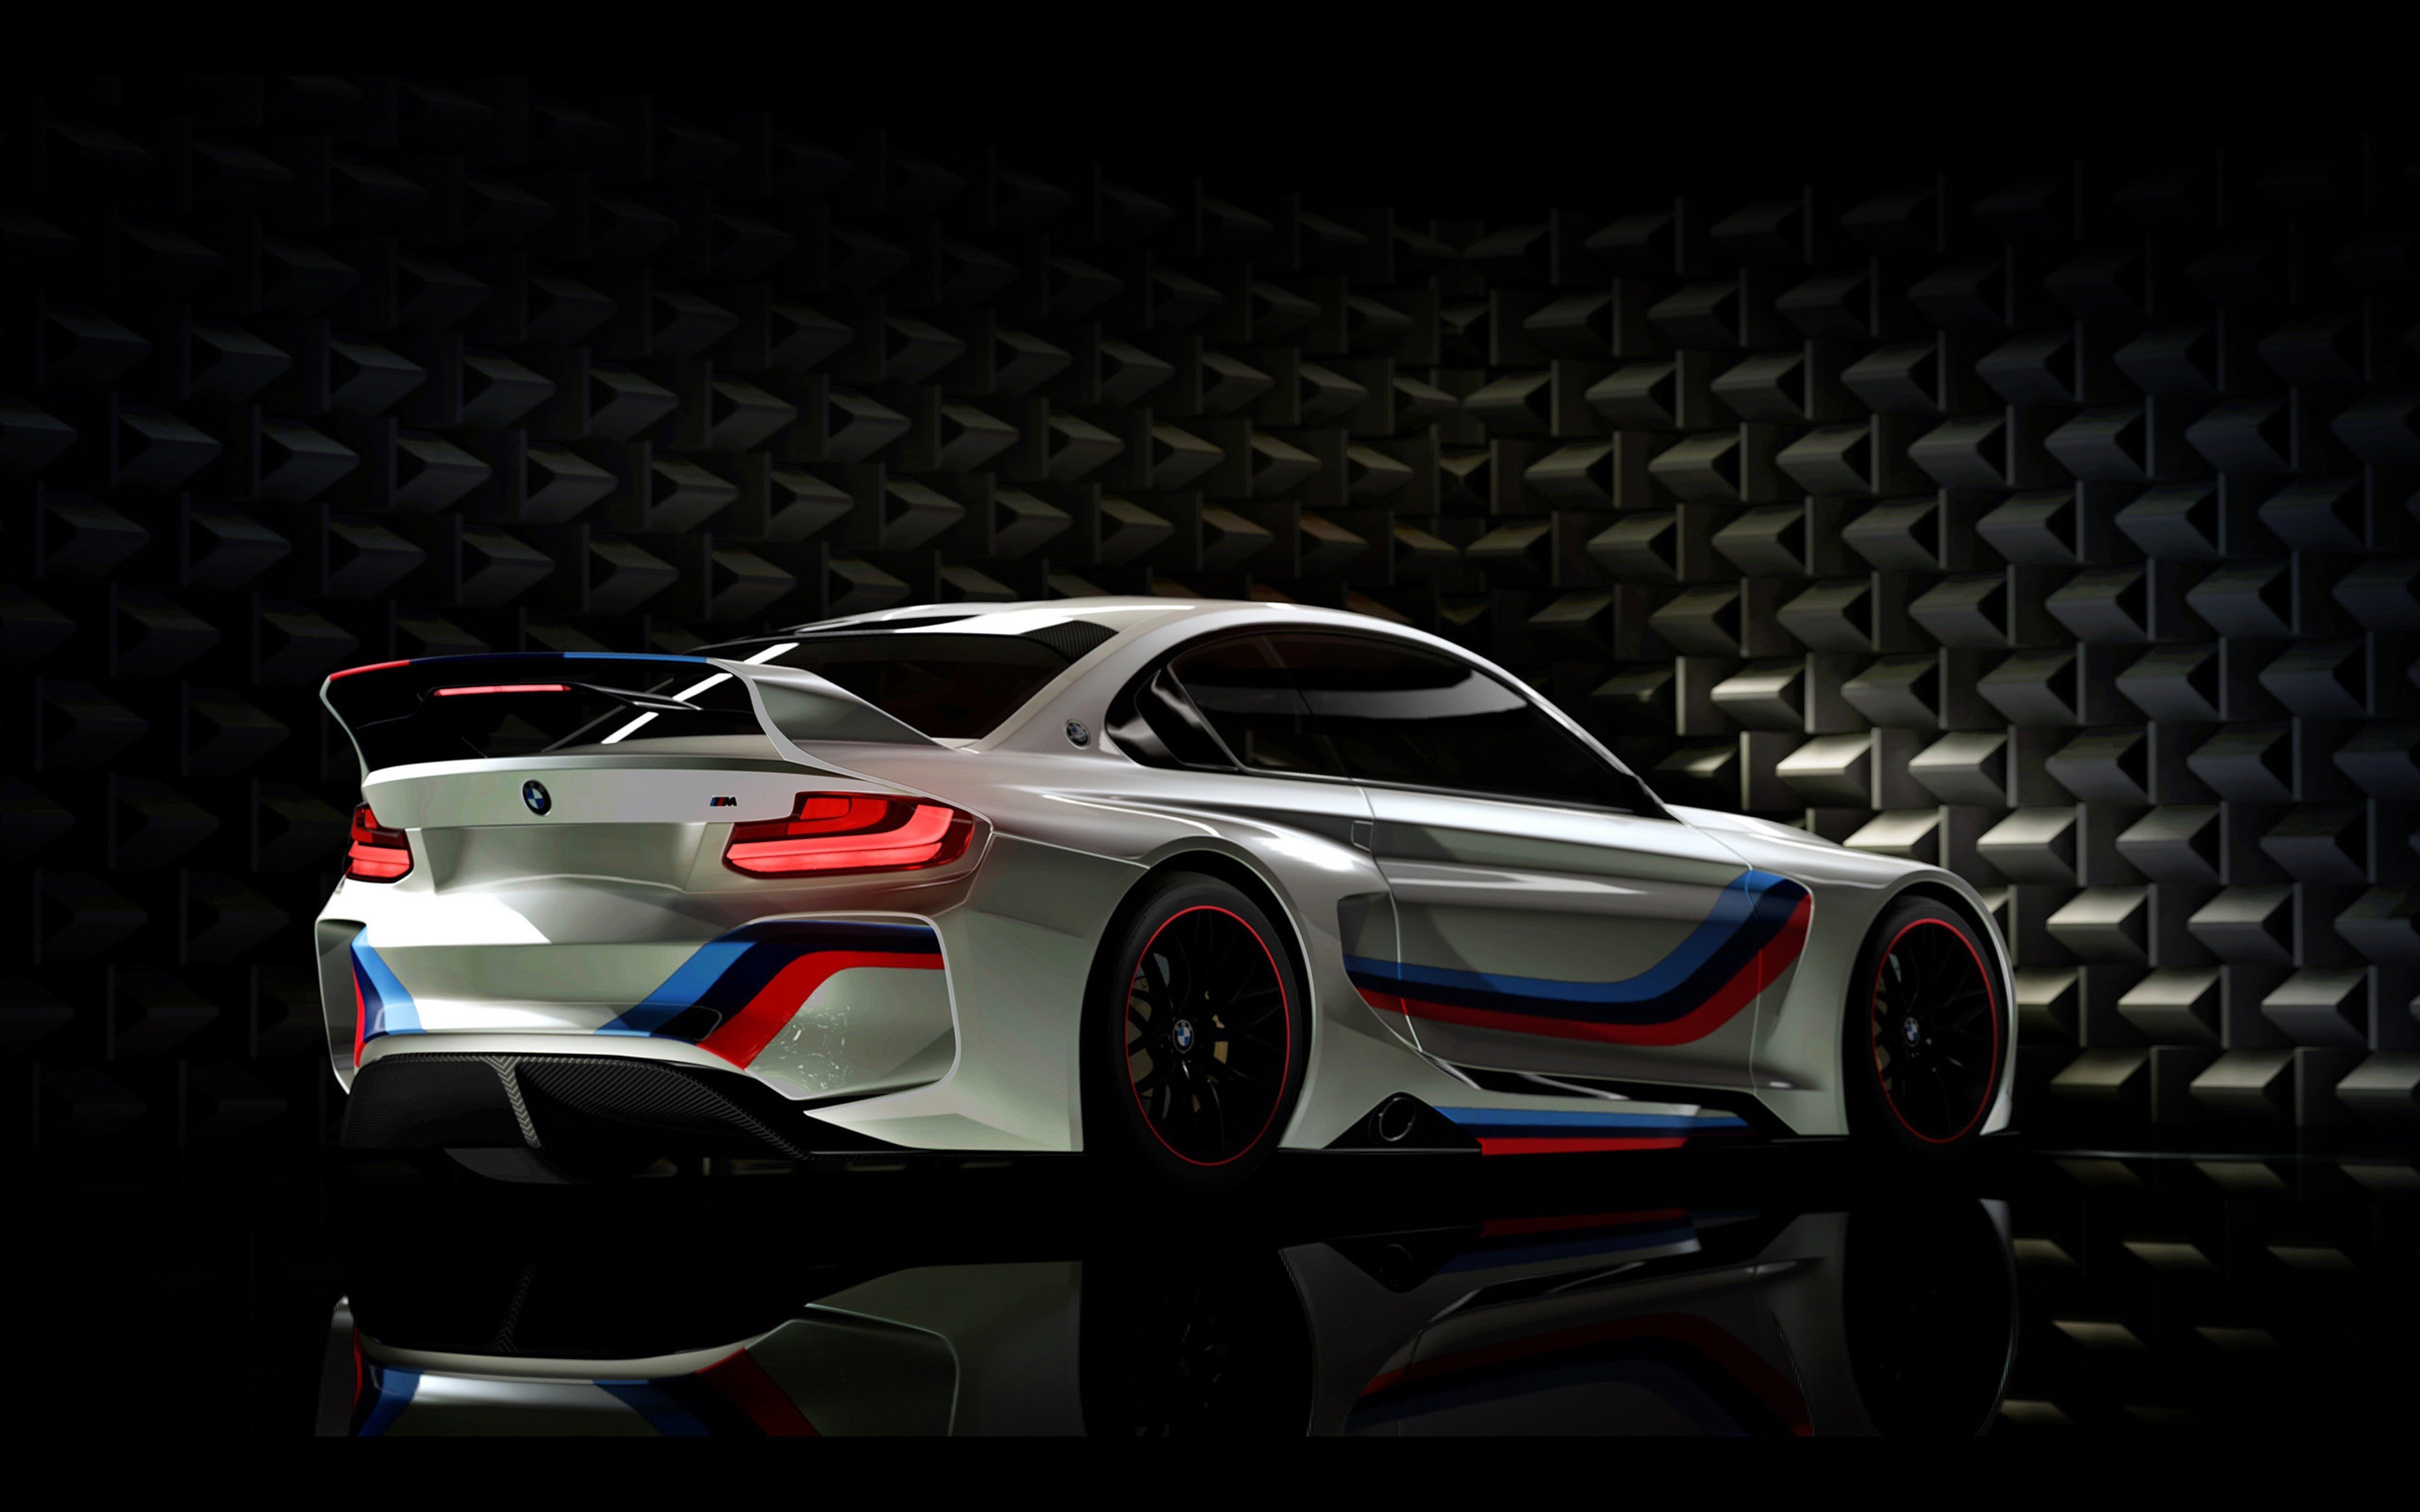 2014, Bmw, Vision, Gran turismo, Concept, Race, Car, Game, Vehicle, Racing, Germany, 4000x2500,  3 Wallpaper